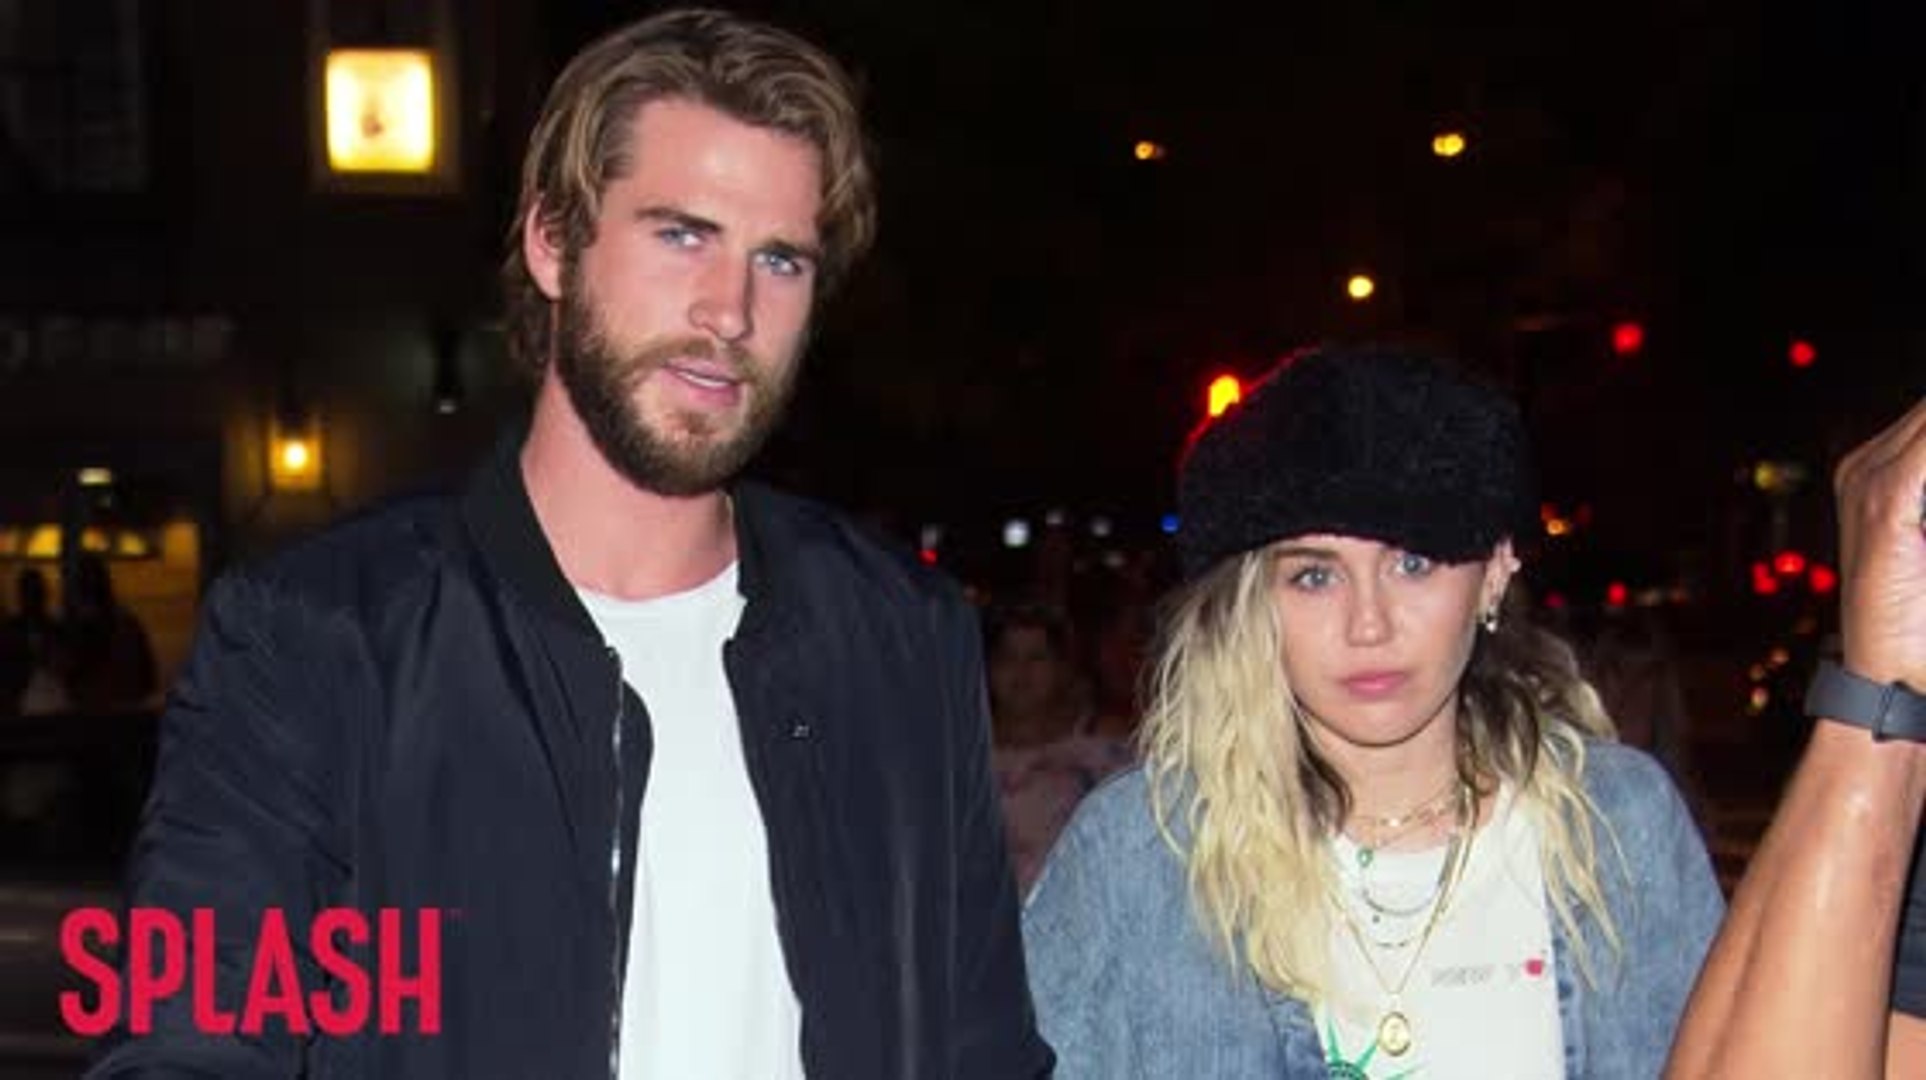 Miley Cyrus and Liam Hemsworth Reportedly Planning July 4th Wedding